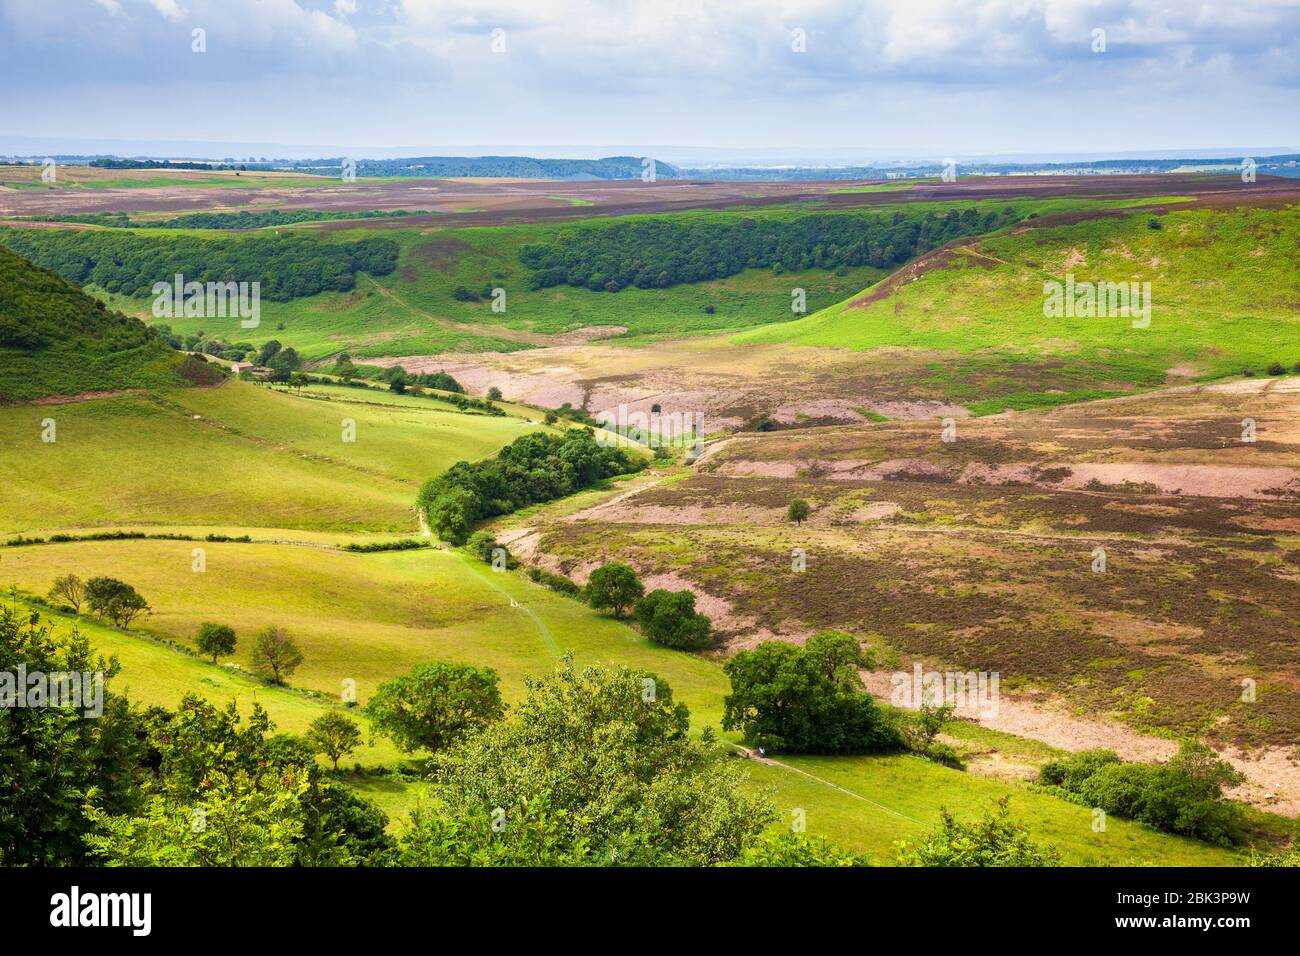 A south west view of the Hole of Horcum in the North York Moors National Park, Yorkshire, England Stock Photo